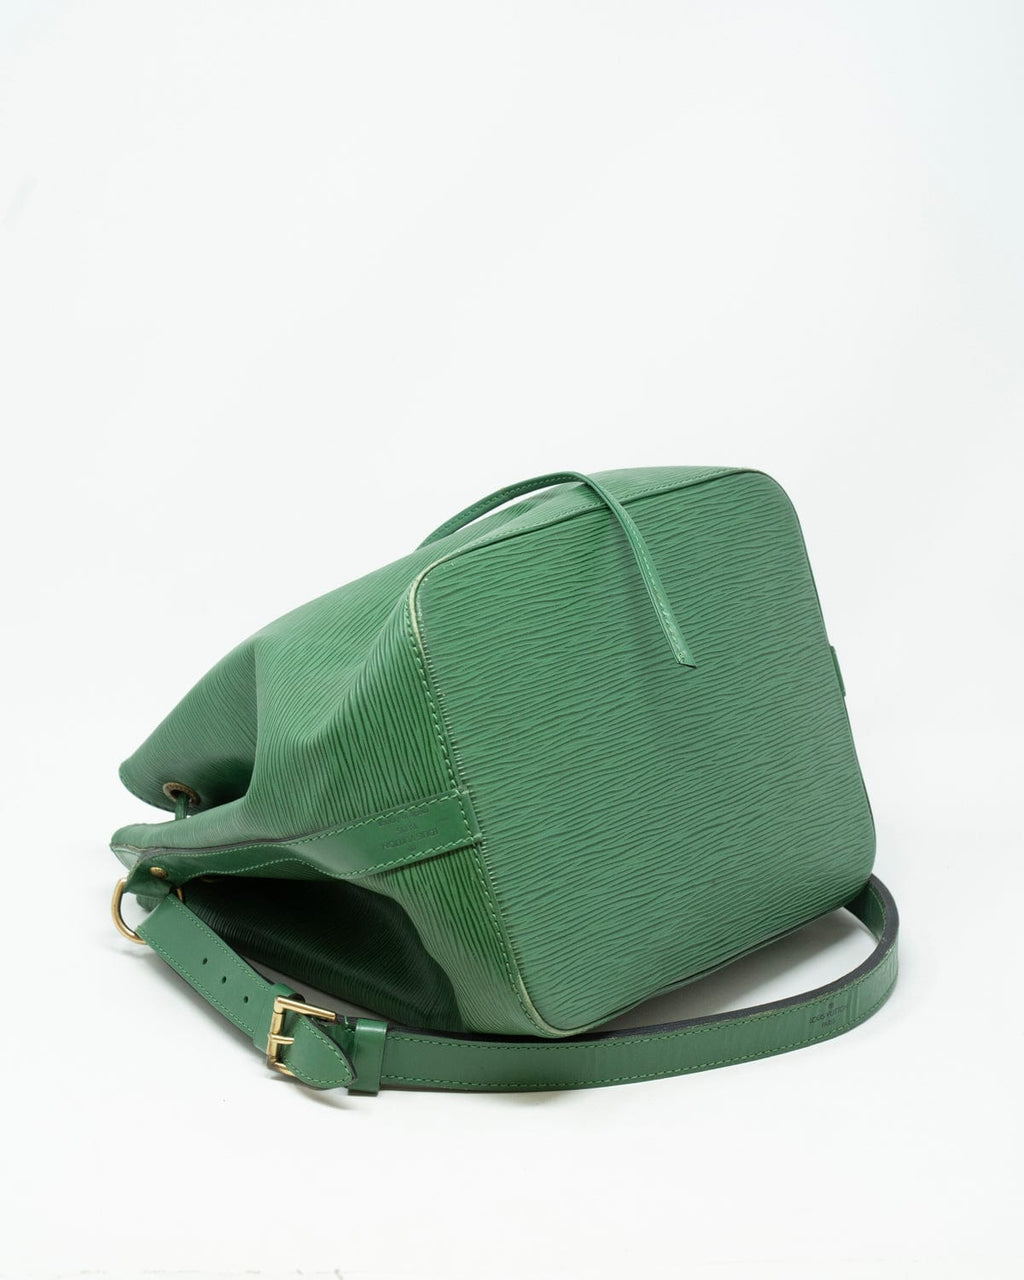 ANONYMOUS. Emerald green epi leather satchel bag; two op…